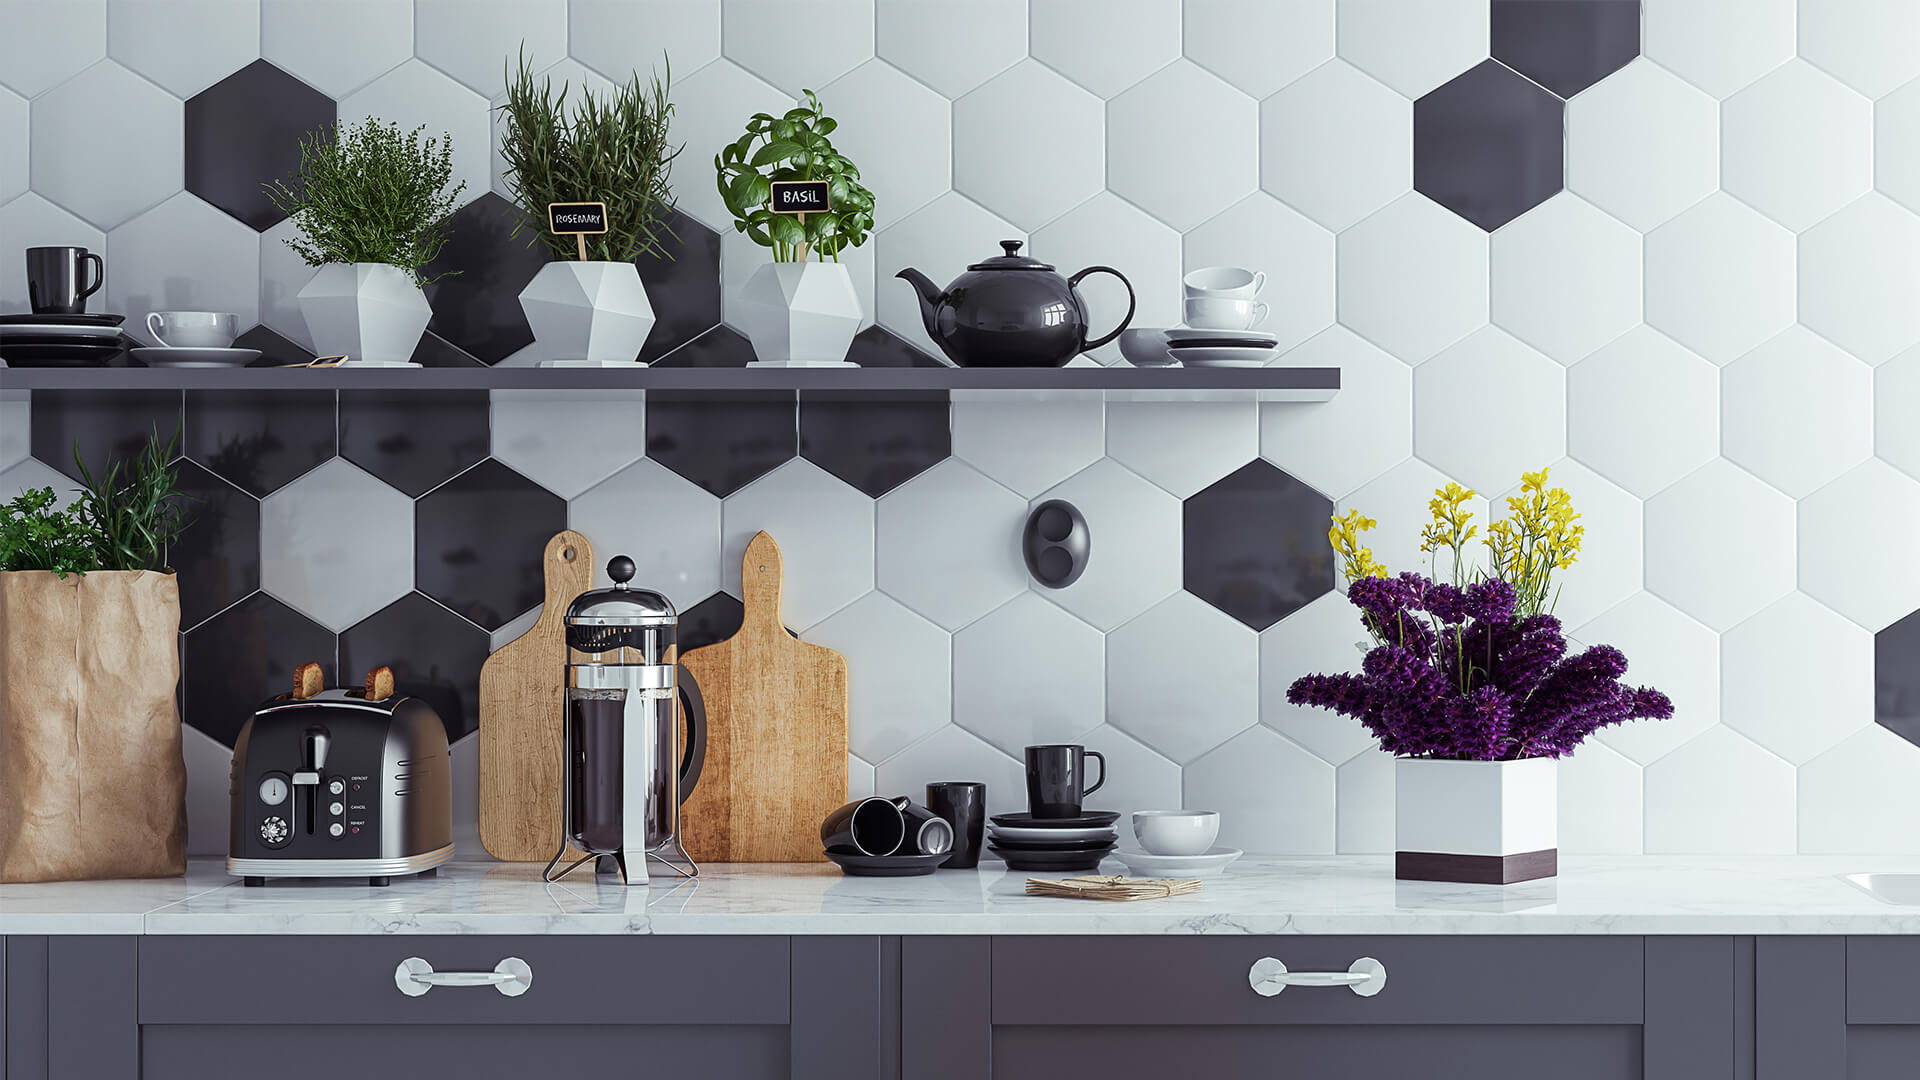 Grey and white hexagon tiled wall, with grey kitchen cabinets and silver appliances. Small herb plants and flowers on shelves.